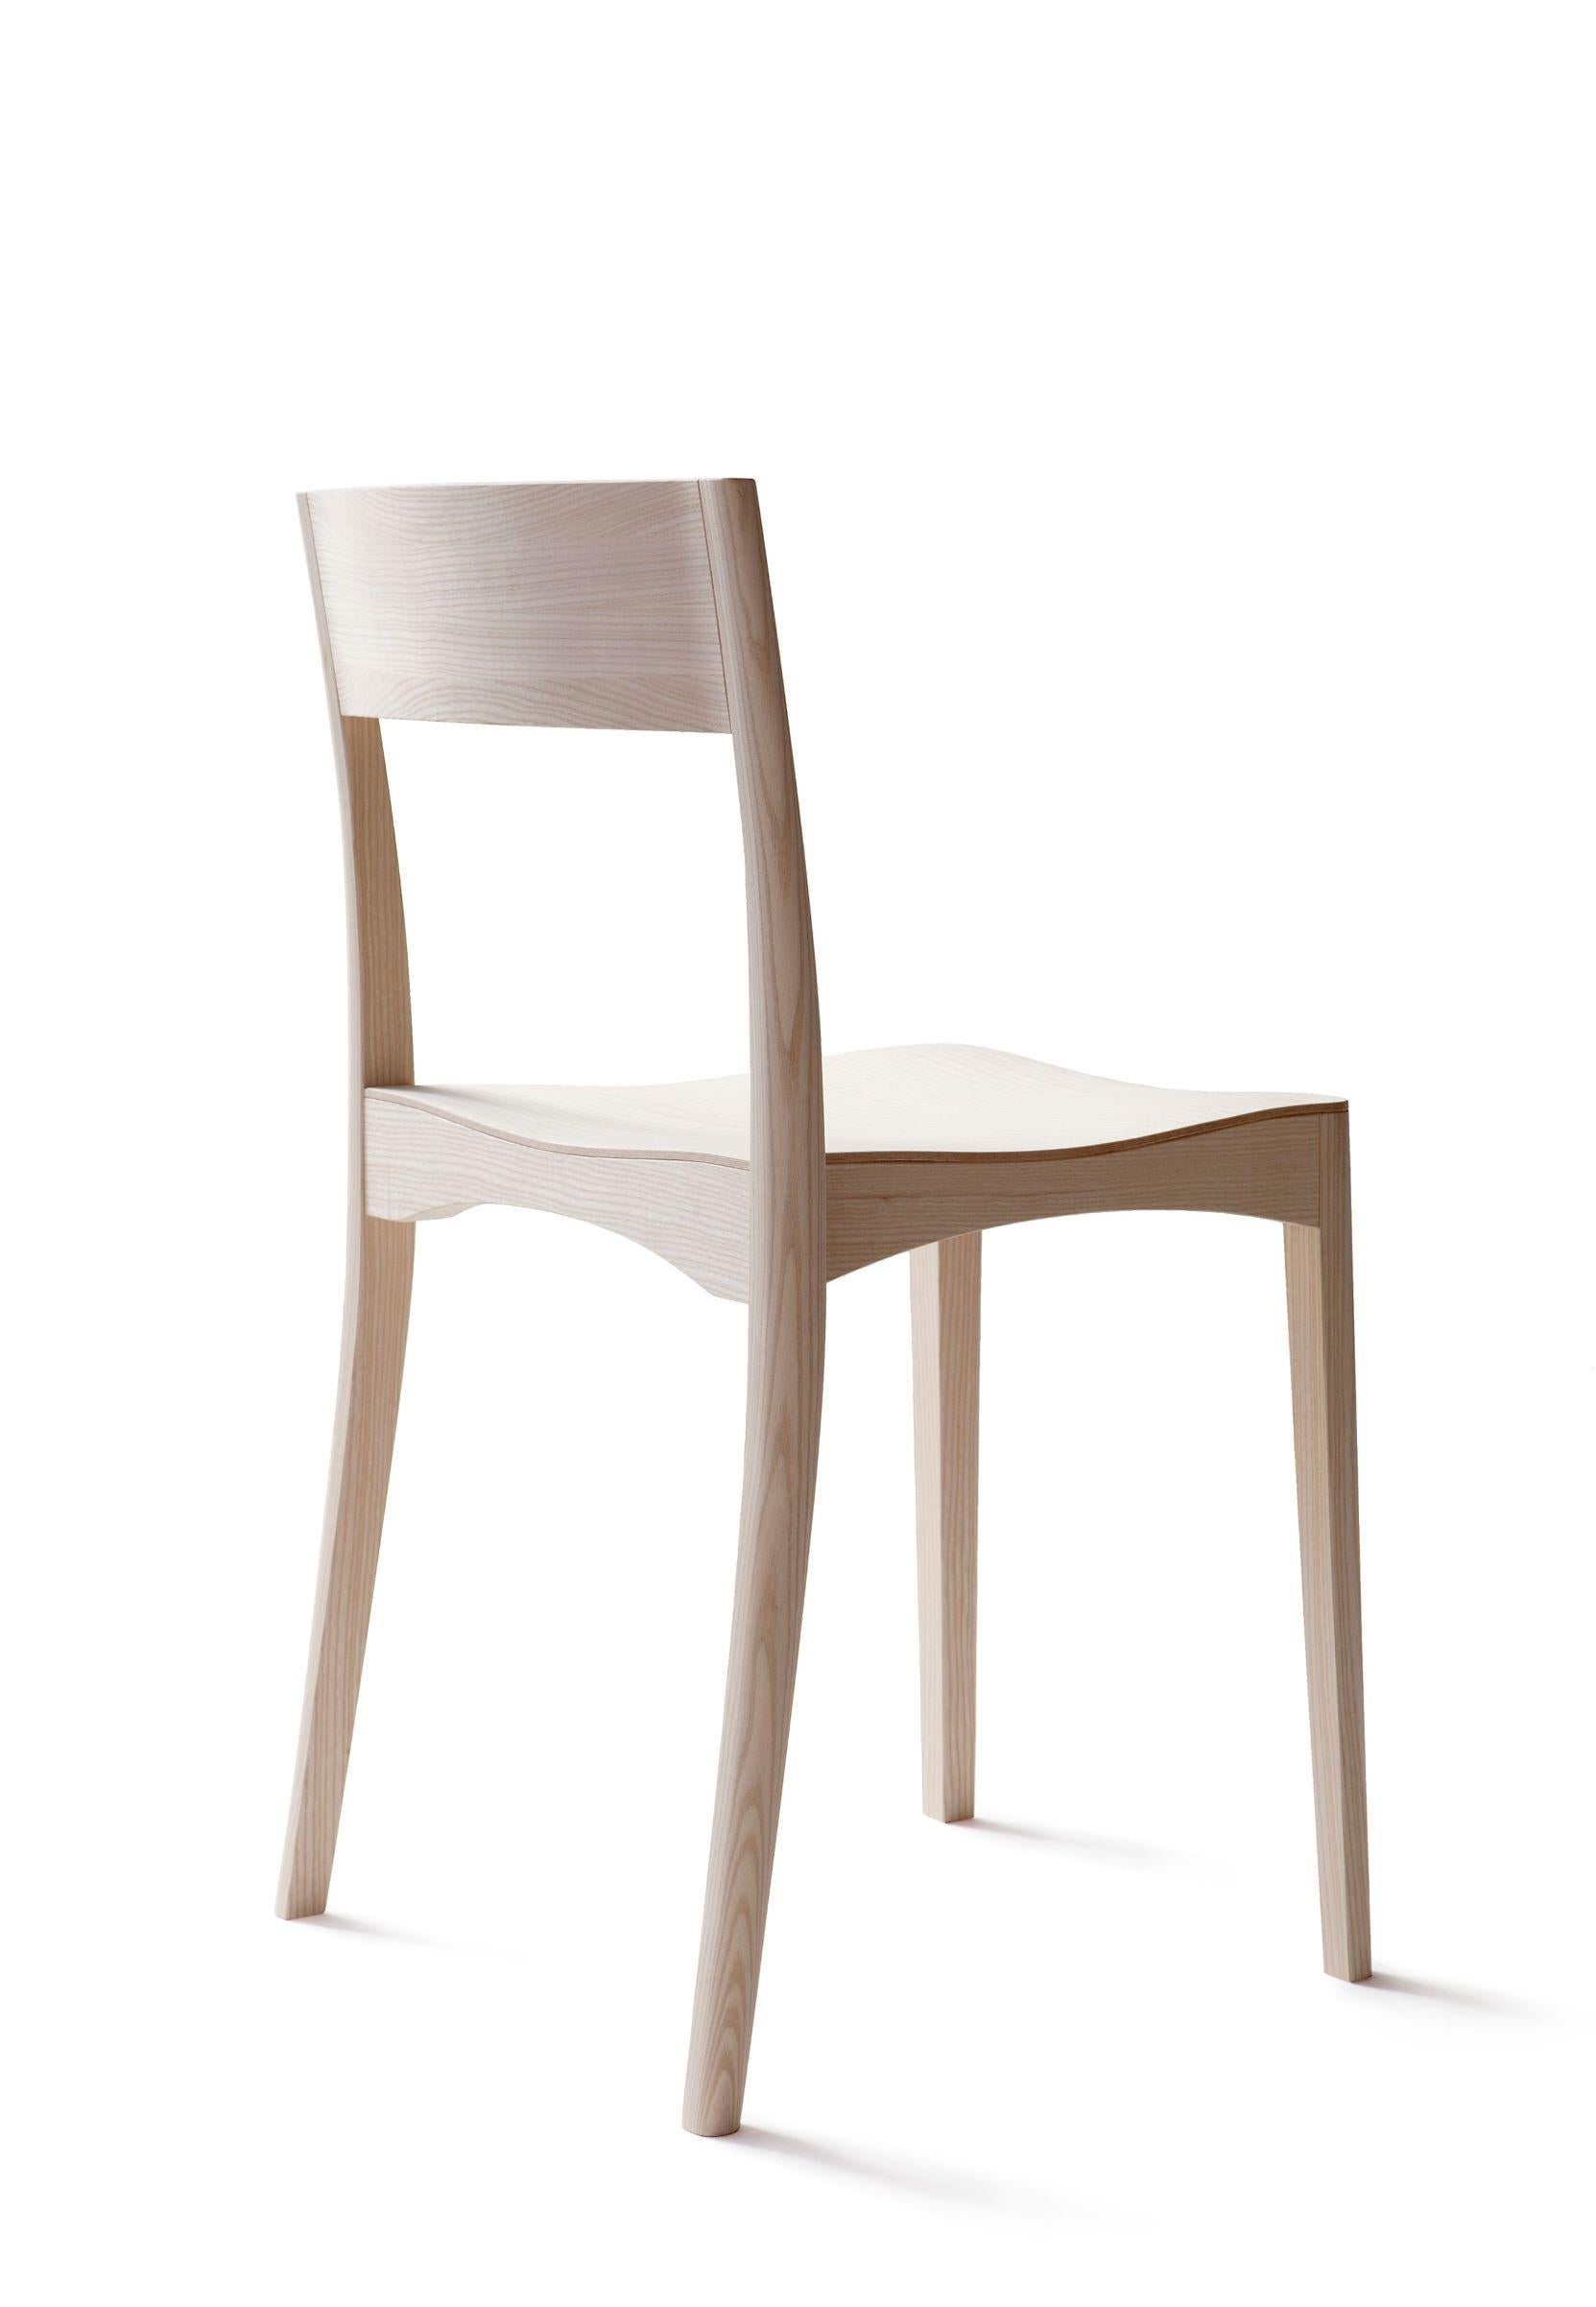 Contemporary October Light Chair in Ash by Samuli Naamanka For Sale